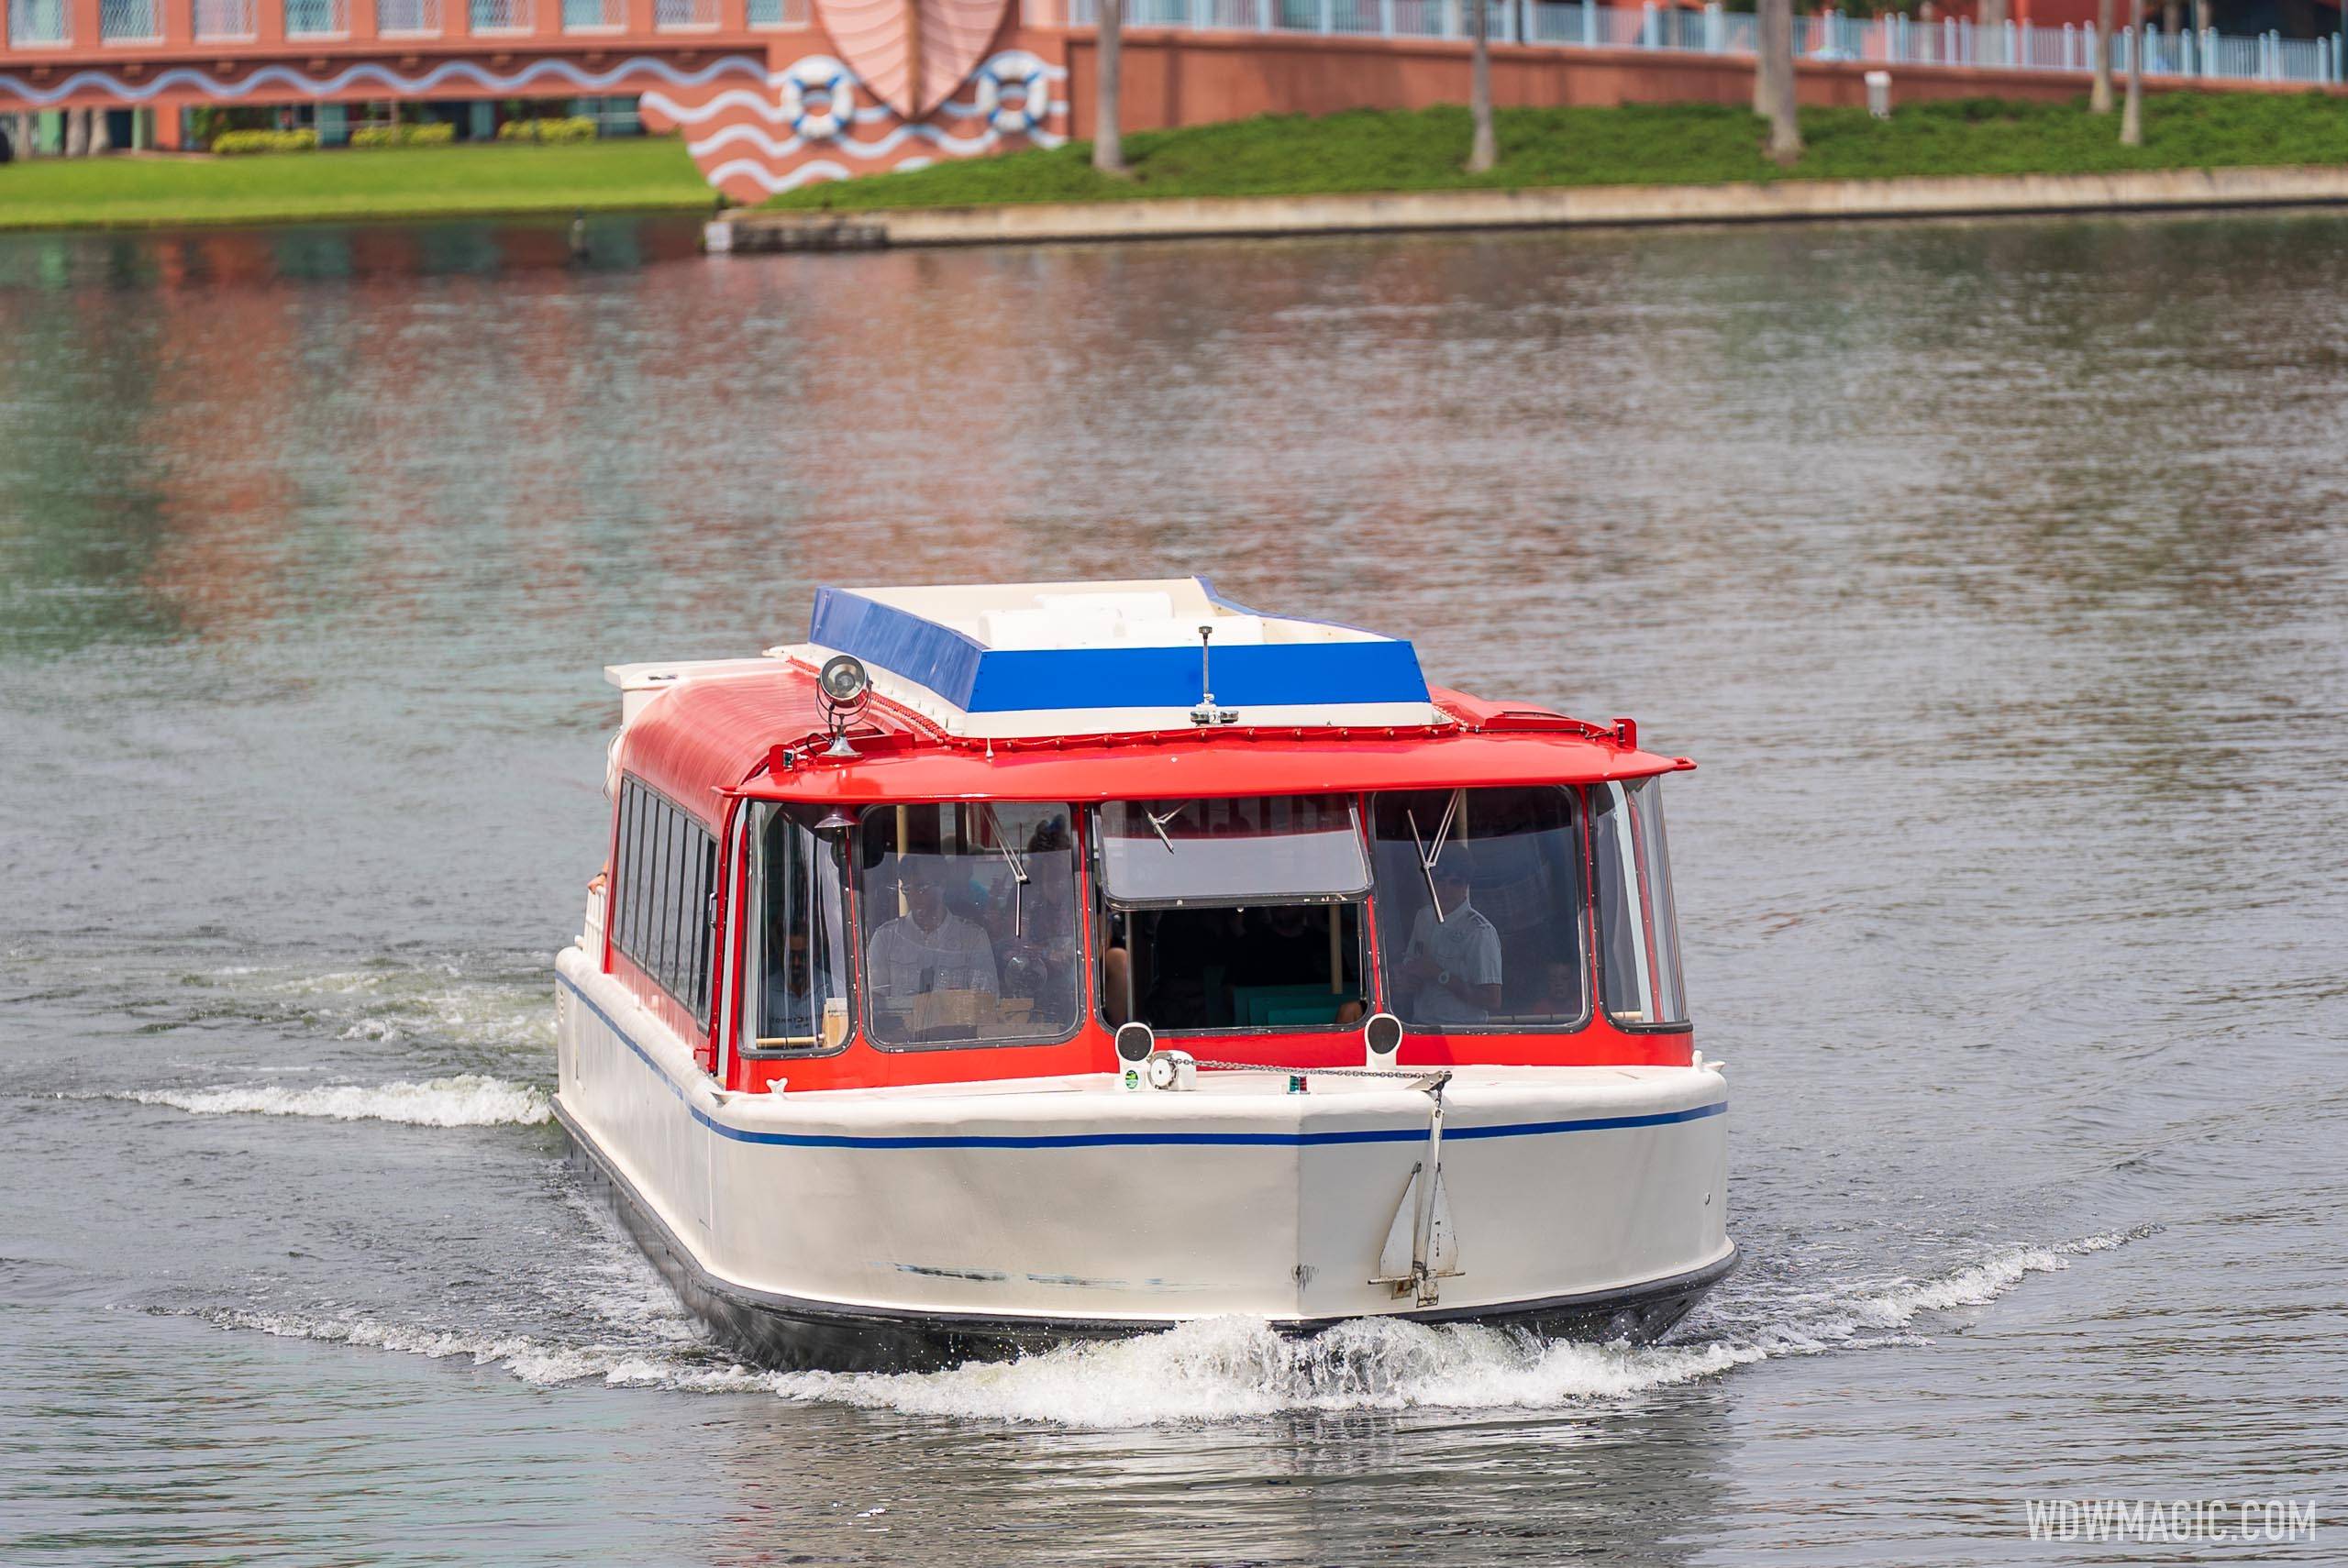 EPCOT area Friendship cruiser boats are now temporarily closed